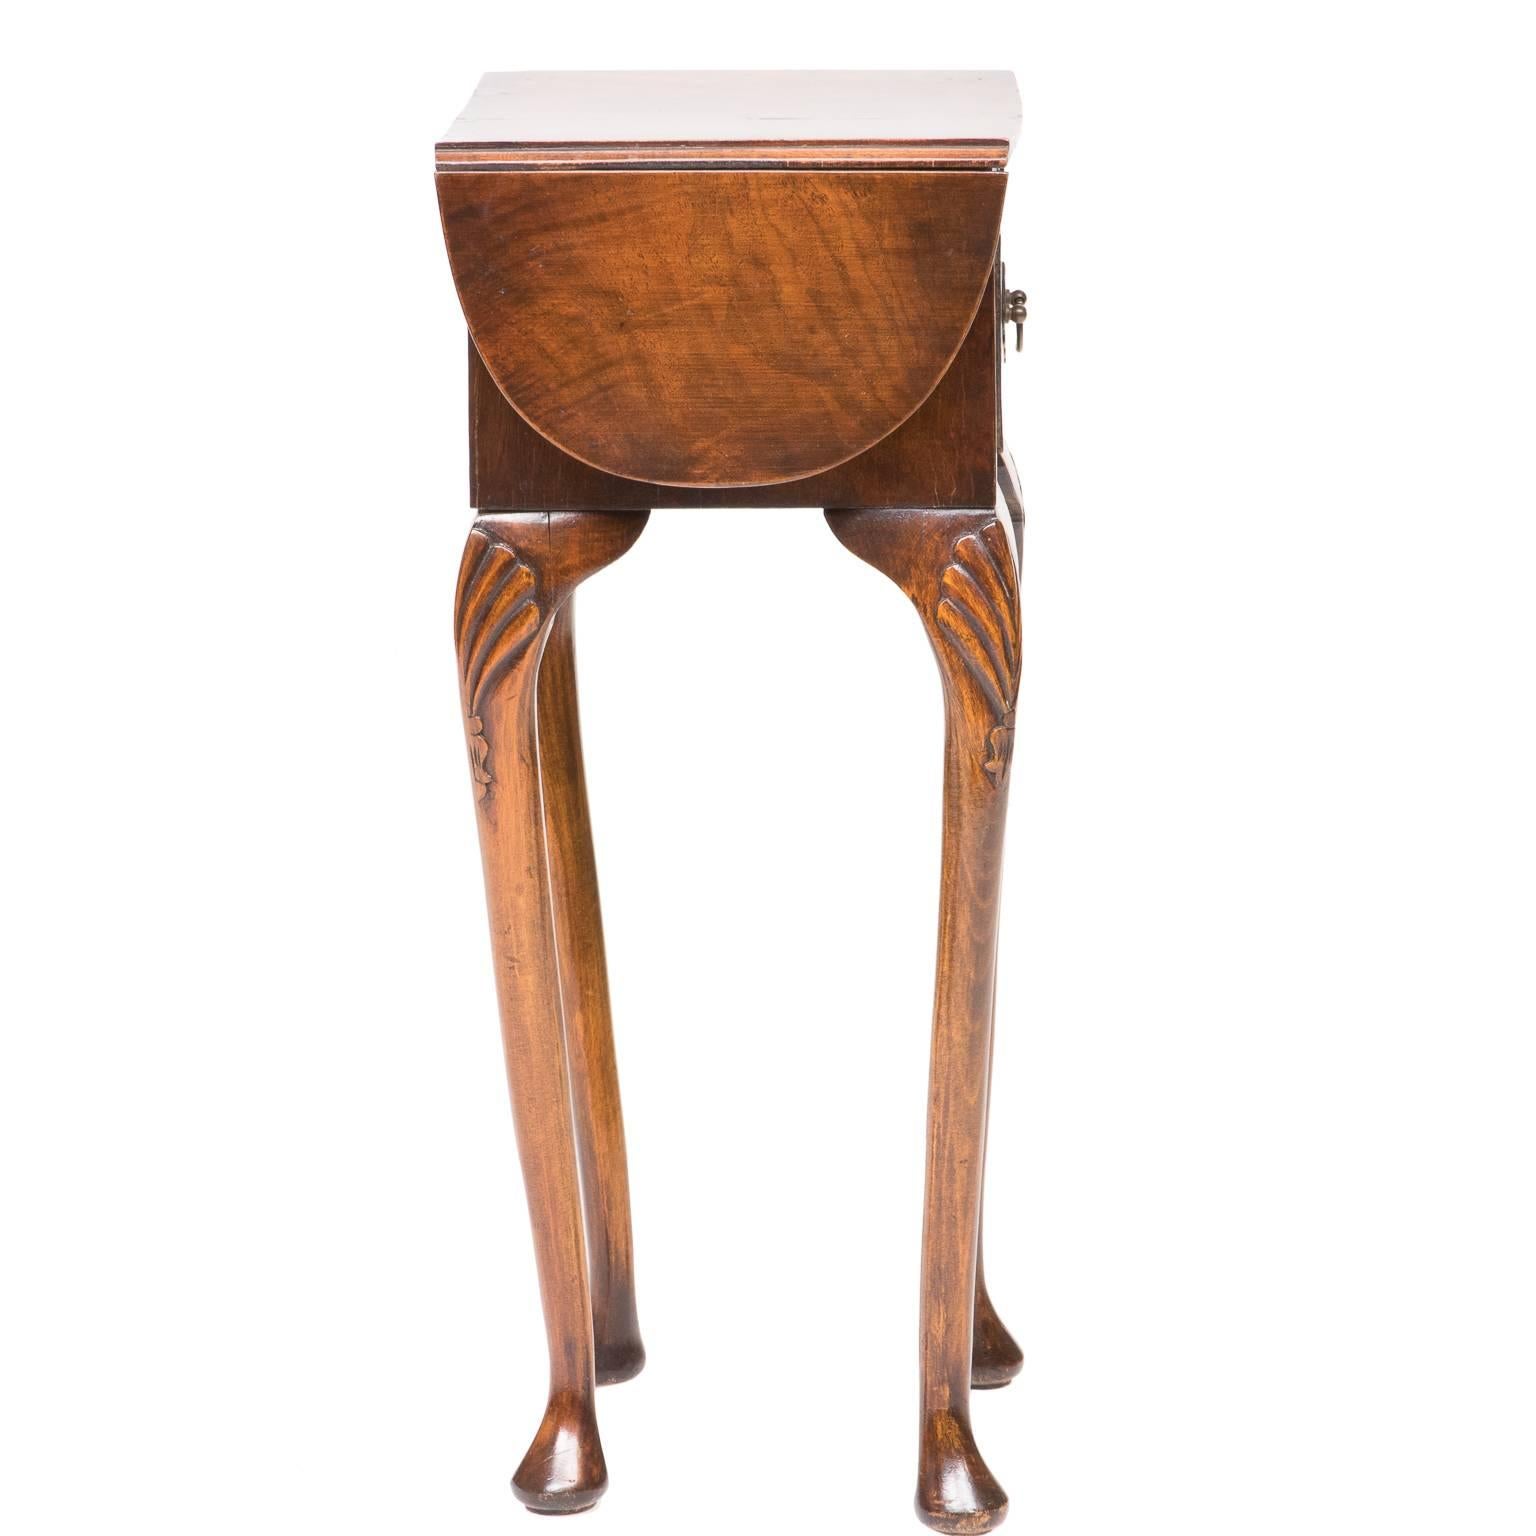 English 19th Century Queen Anne Drop-Leaf Side Table